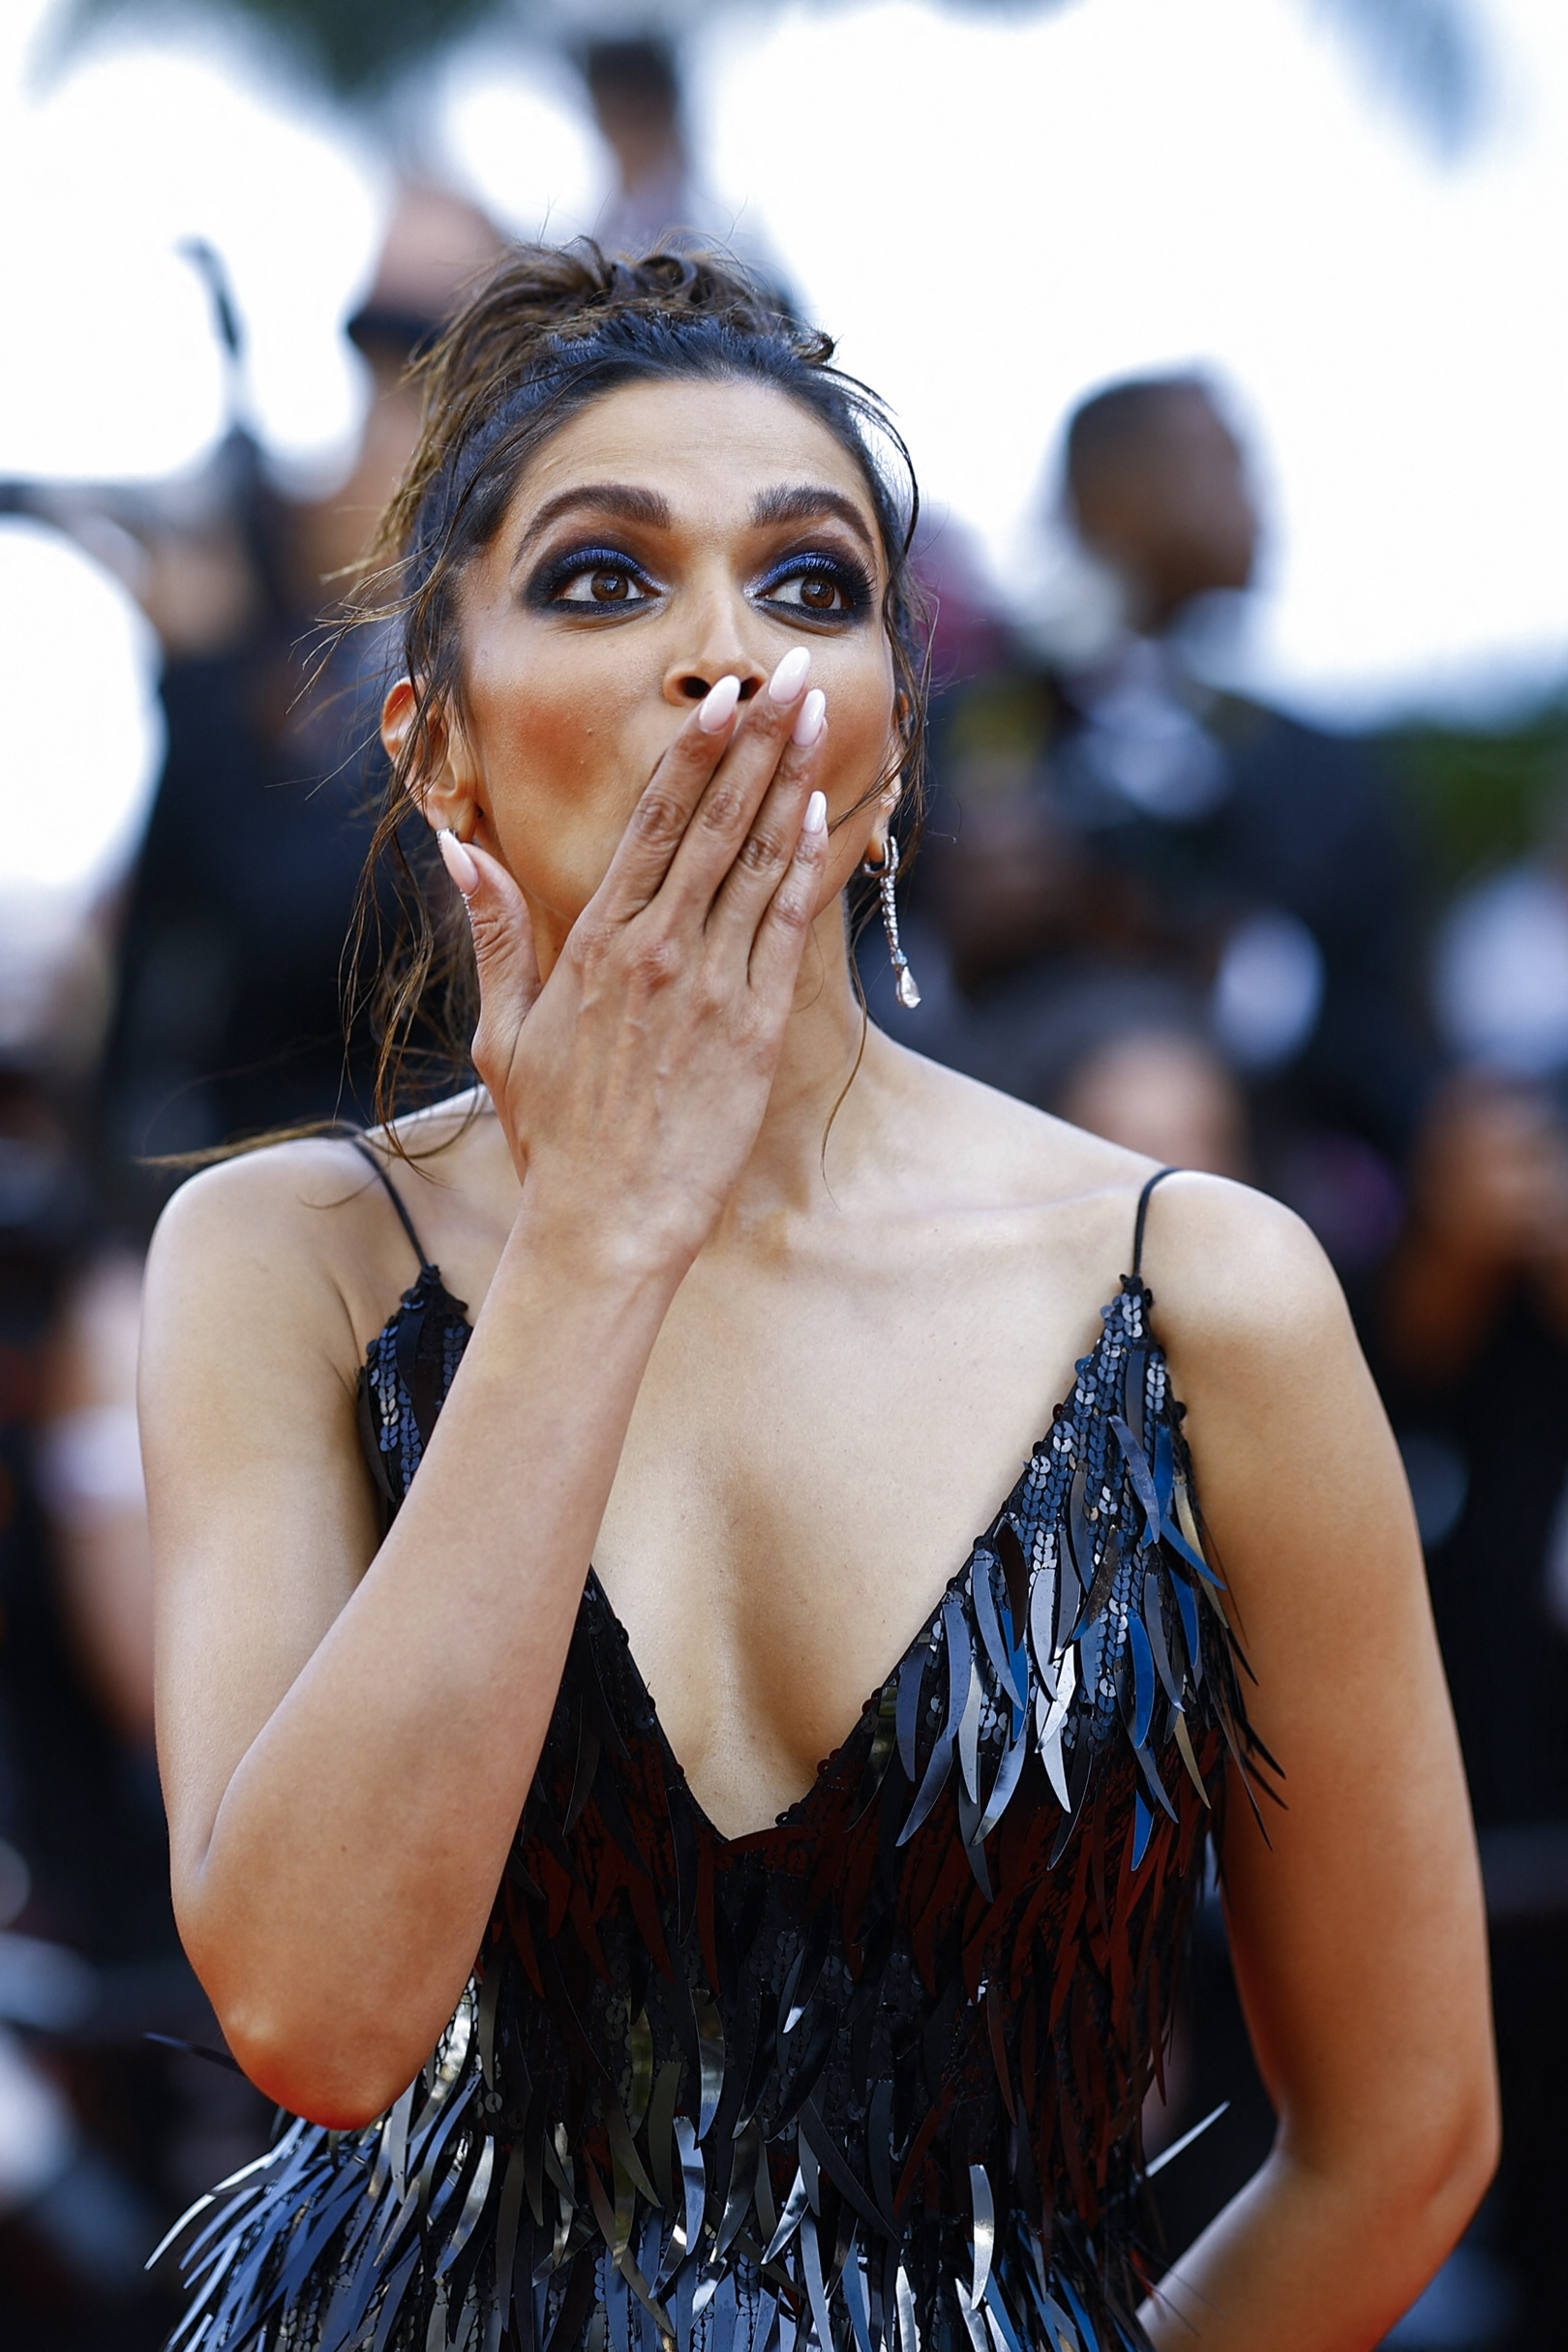 Sexy Video Deepika Kapoor - Deepika Padukone Blows Kiss in Super Hot Embellished Gown on Cannes Red  Carpet; See Pics